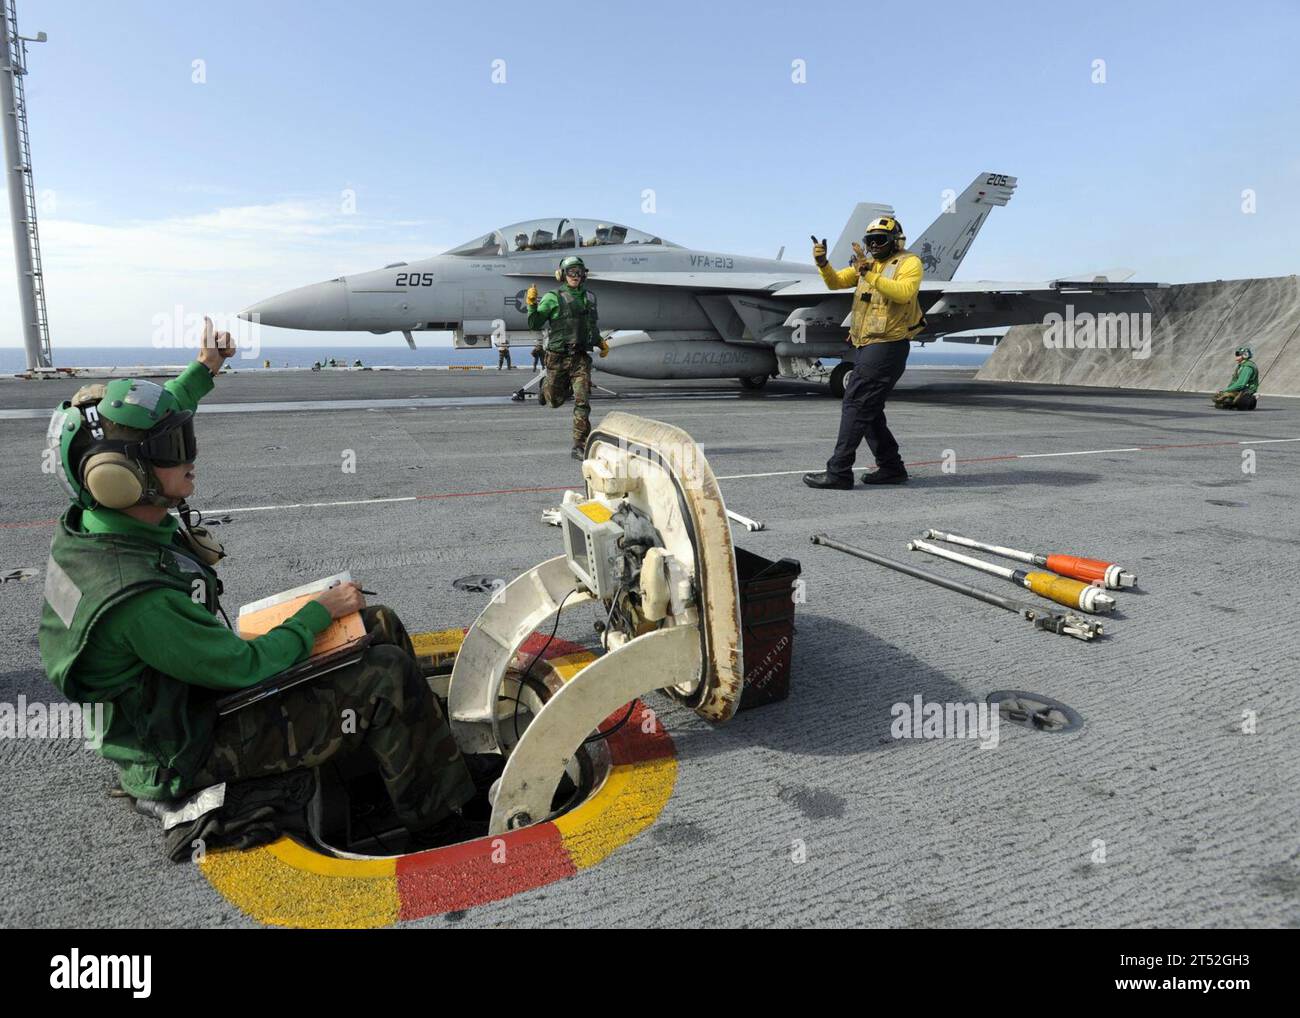 0809097241L-004 ATLANTIC OCEAN (Sept. 9, 2008) Flight deck personnel aboard the aircraft carrier USS Theodore Roosevelt (CVN 71) prepare to launch an F/A-18F Super Hornet strike fighter assigned to the ТBlacklionsУ of Strike Fighter Squadron (VFA) 213. Roosevelt is deployed as the lead ship of the Theodore Roosevelt Carrier Strike Group supporting maritime security operations in the U.S. 5th and 6th Fleet areas of responsibility. Navy Stock Photo